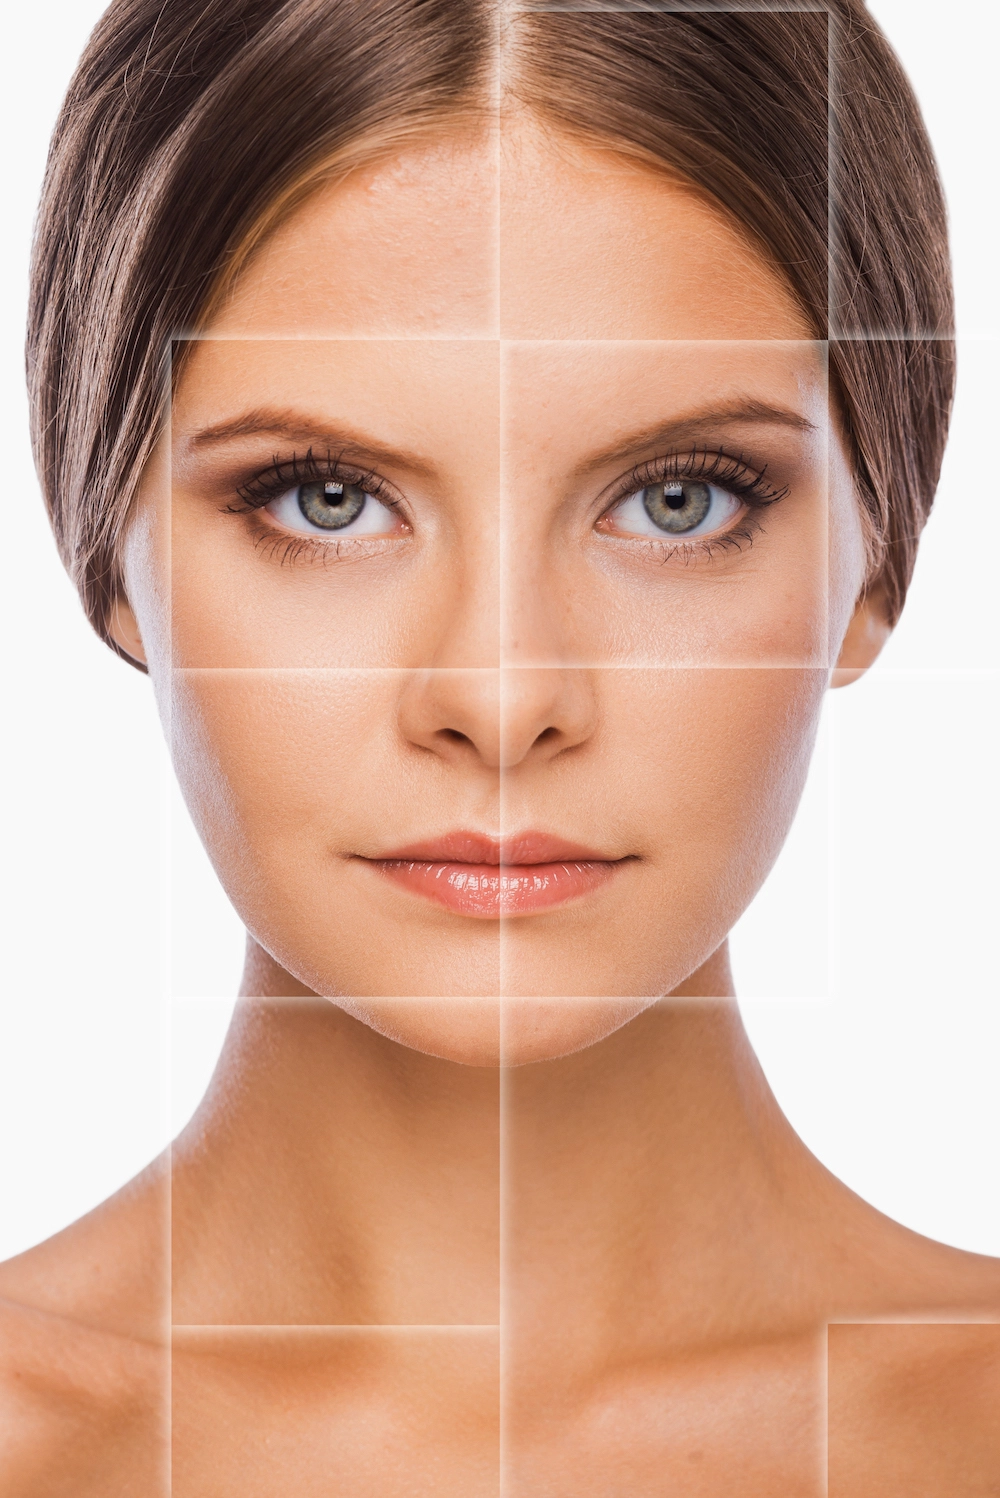 The effects of PRP facial rejuvenation